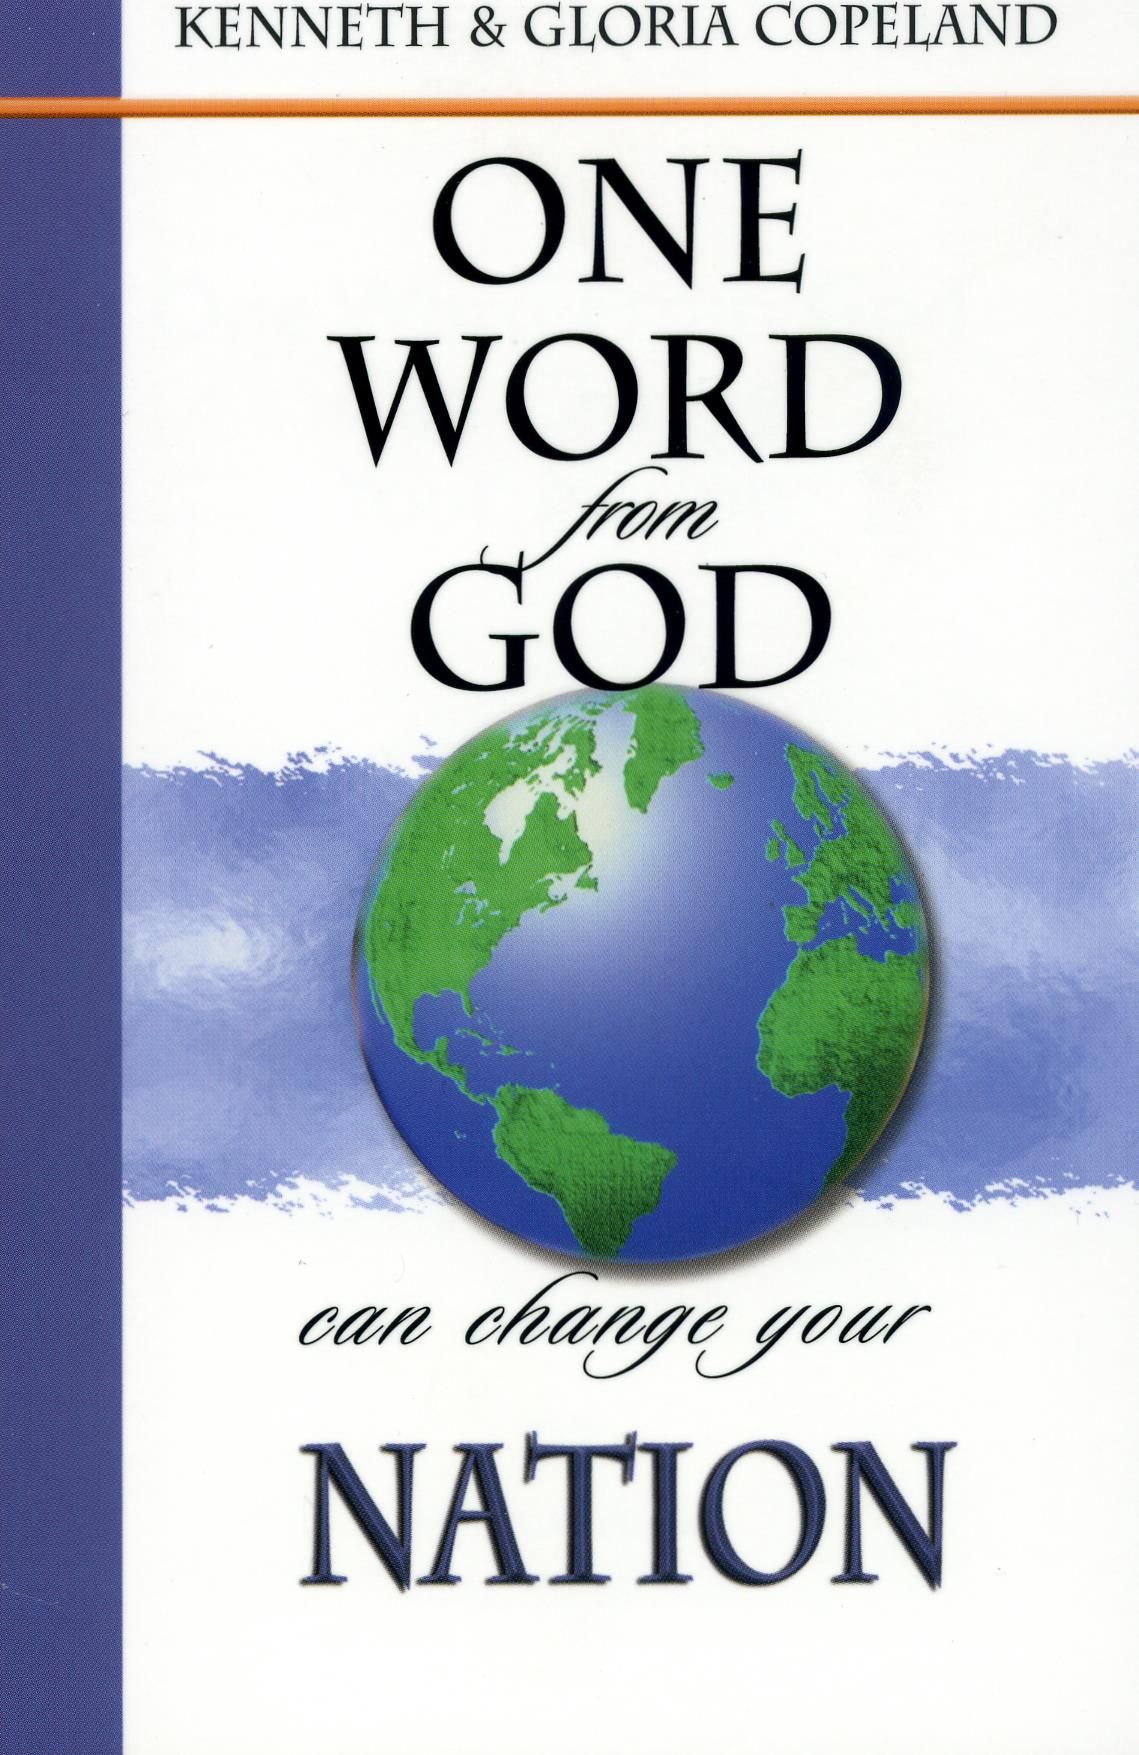 K. & G. Copeland: One Word from God can change your Nation